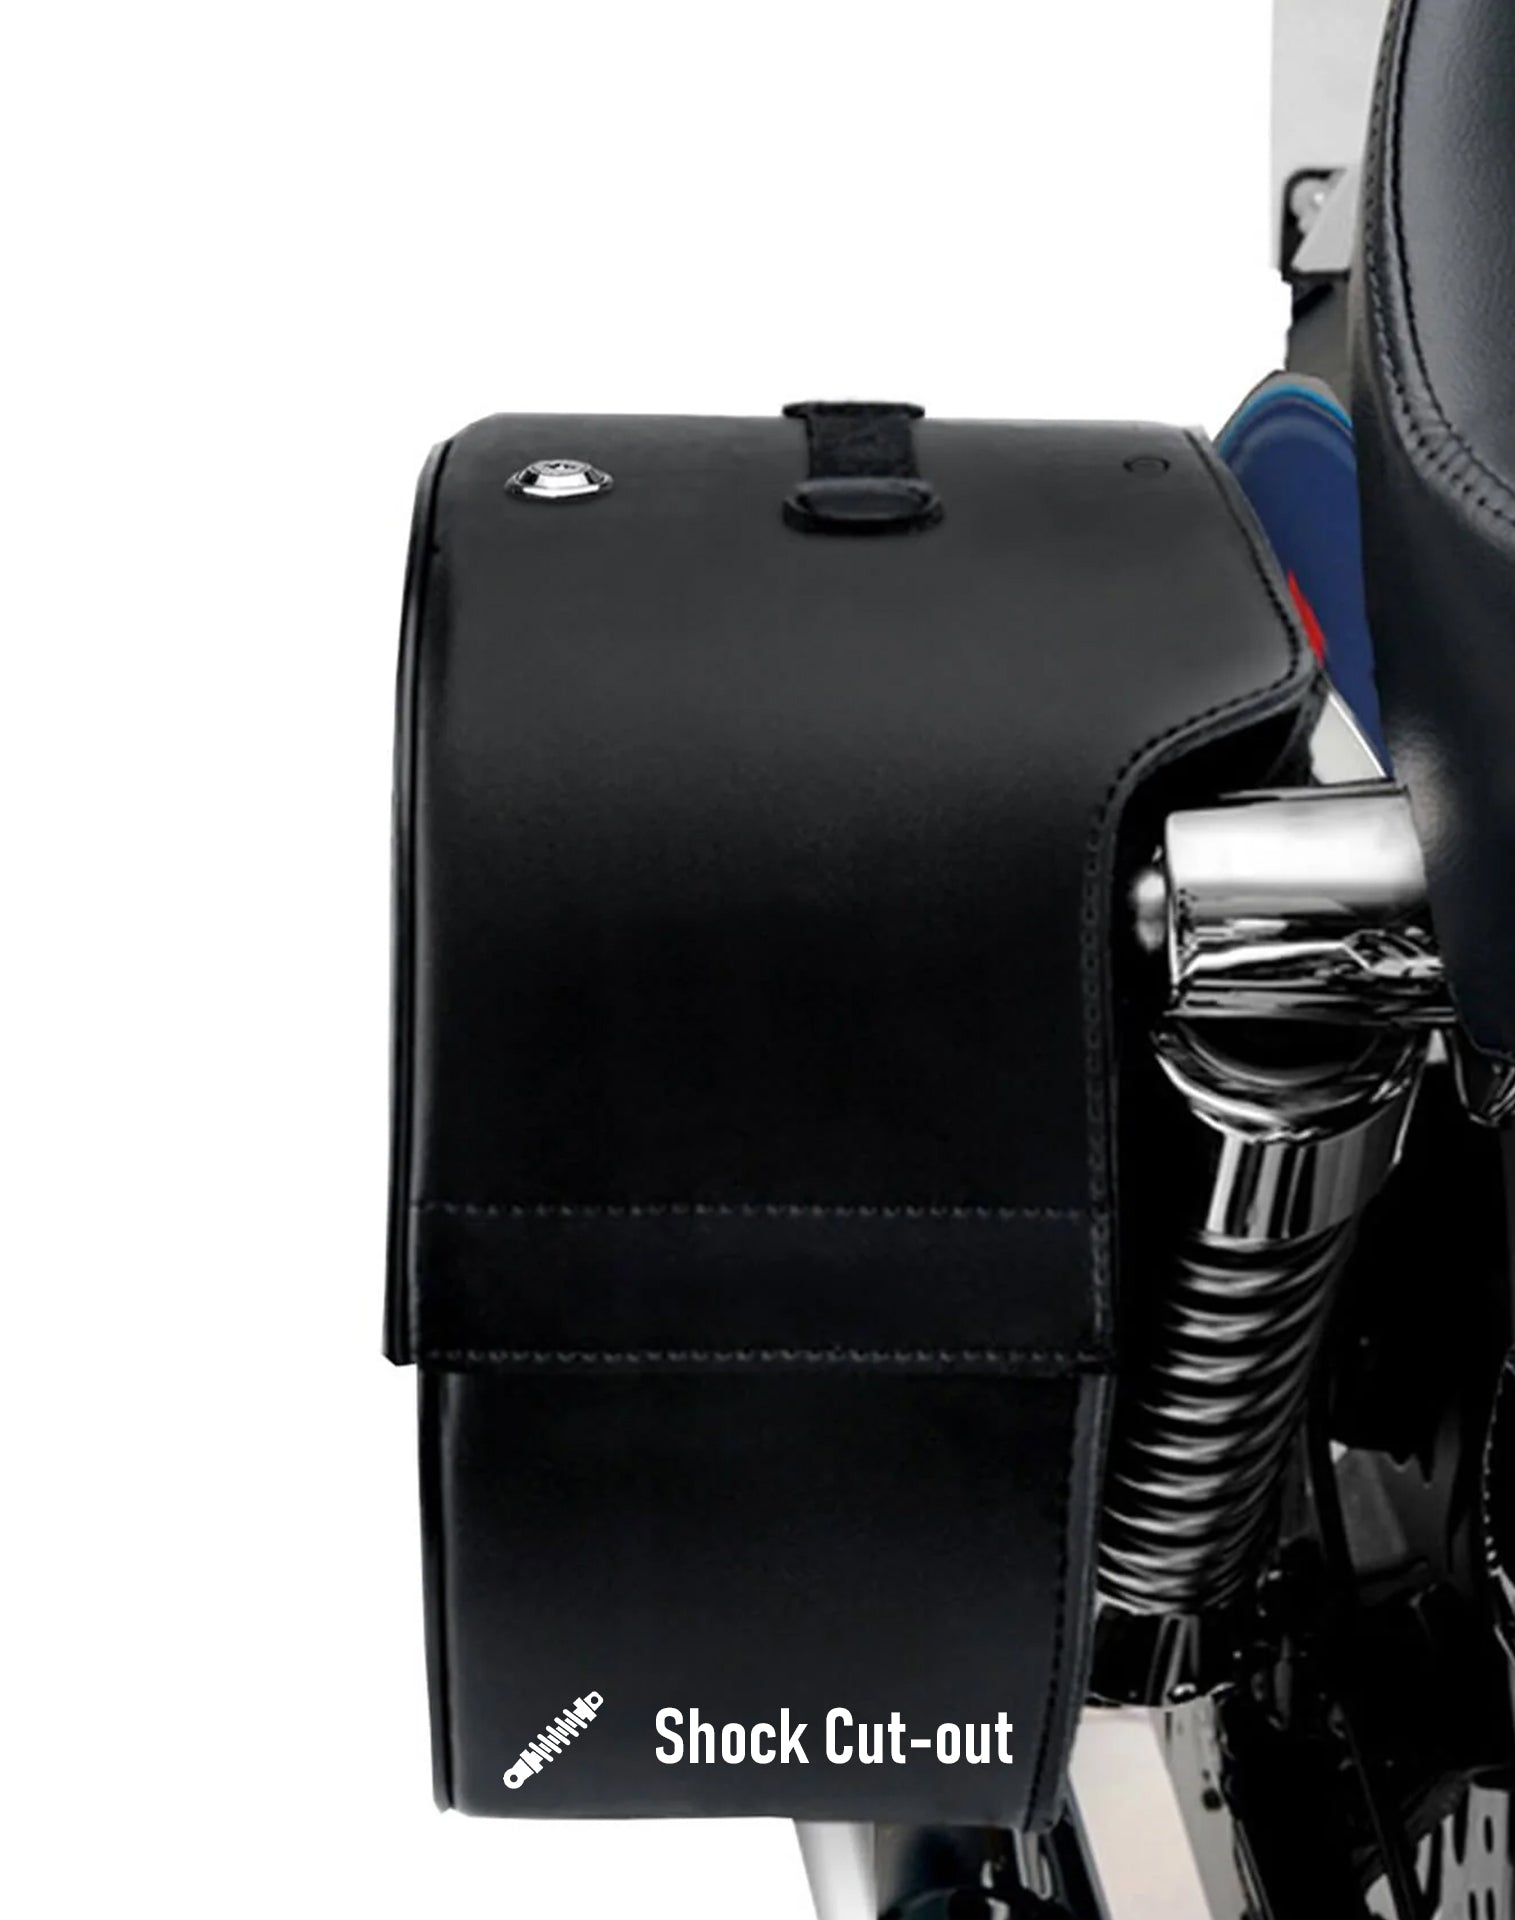 Viking Spear Shock Cut Out Large Triumph Thunderbird Leather Motorcycle Saddlebags are Durable